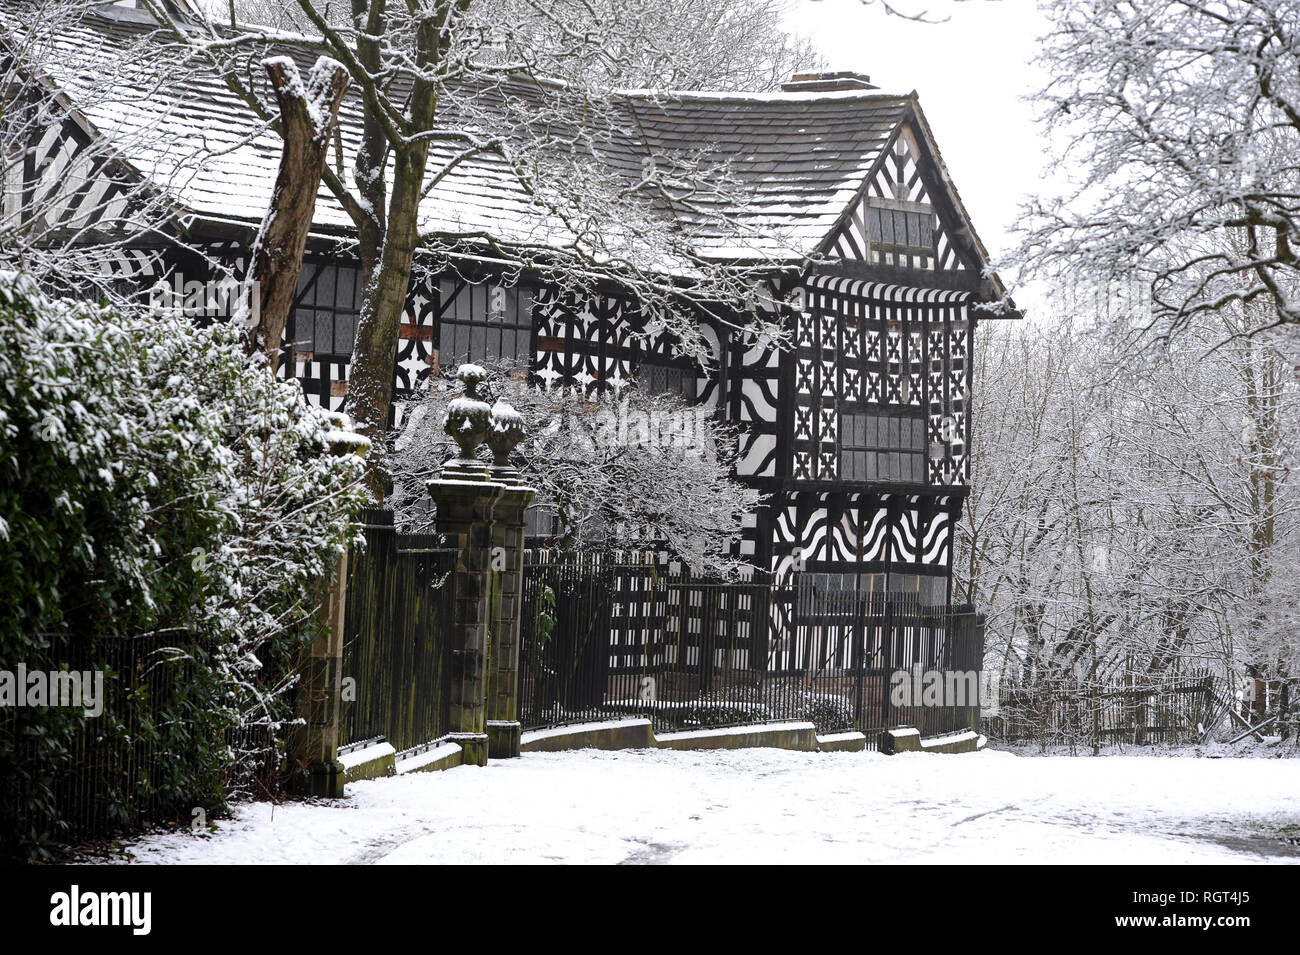 Hall i'th Wood Museum in the snow, Bolton, Lancashire. The 16th Century  manor house was the home of Samuel Crompton in the 18th century where he inve Stock Photo